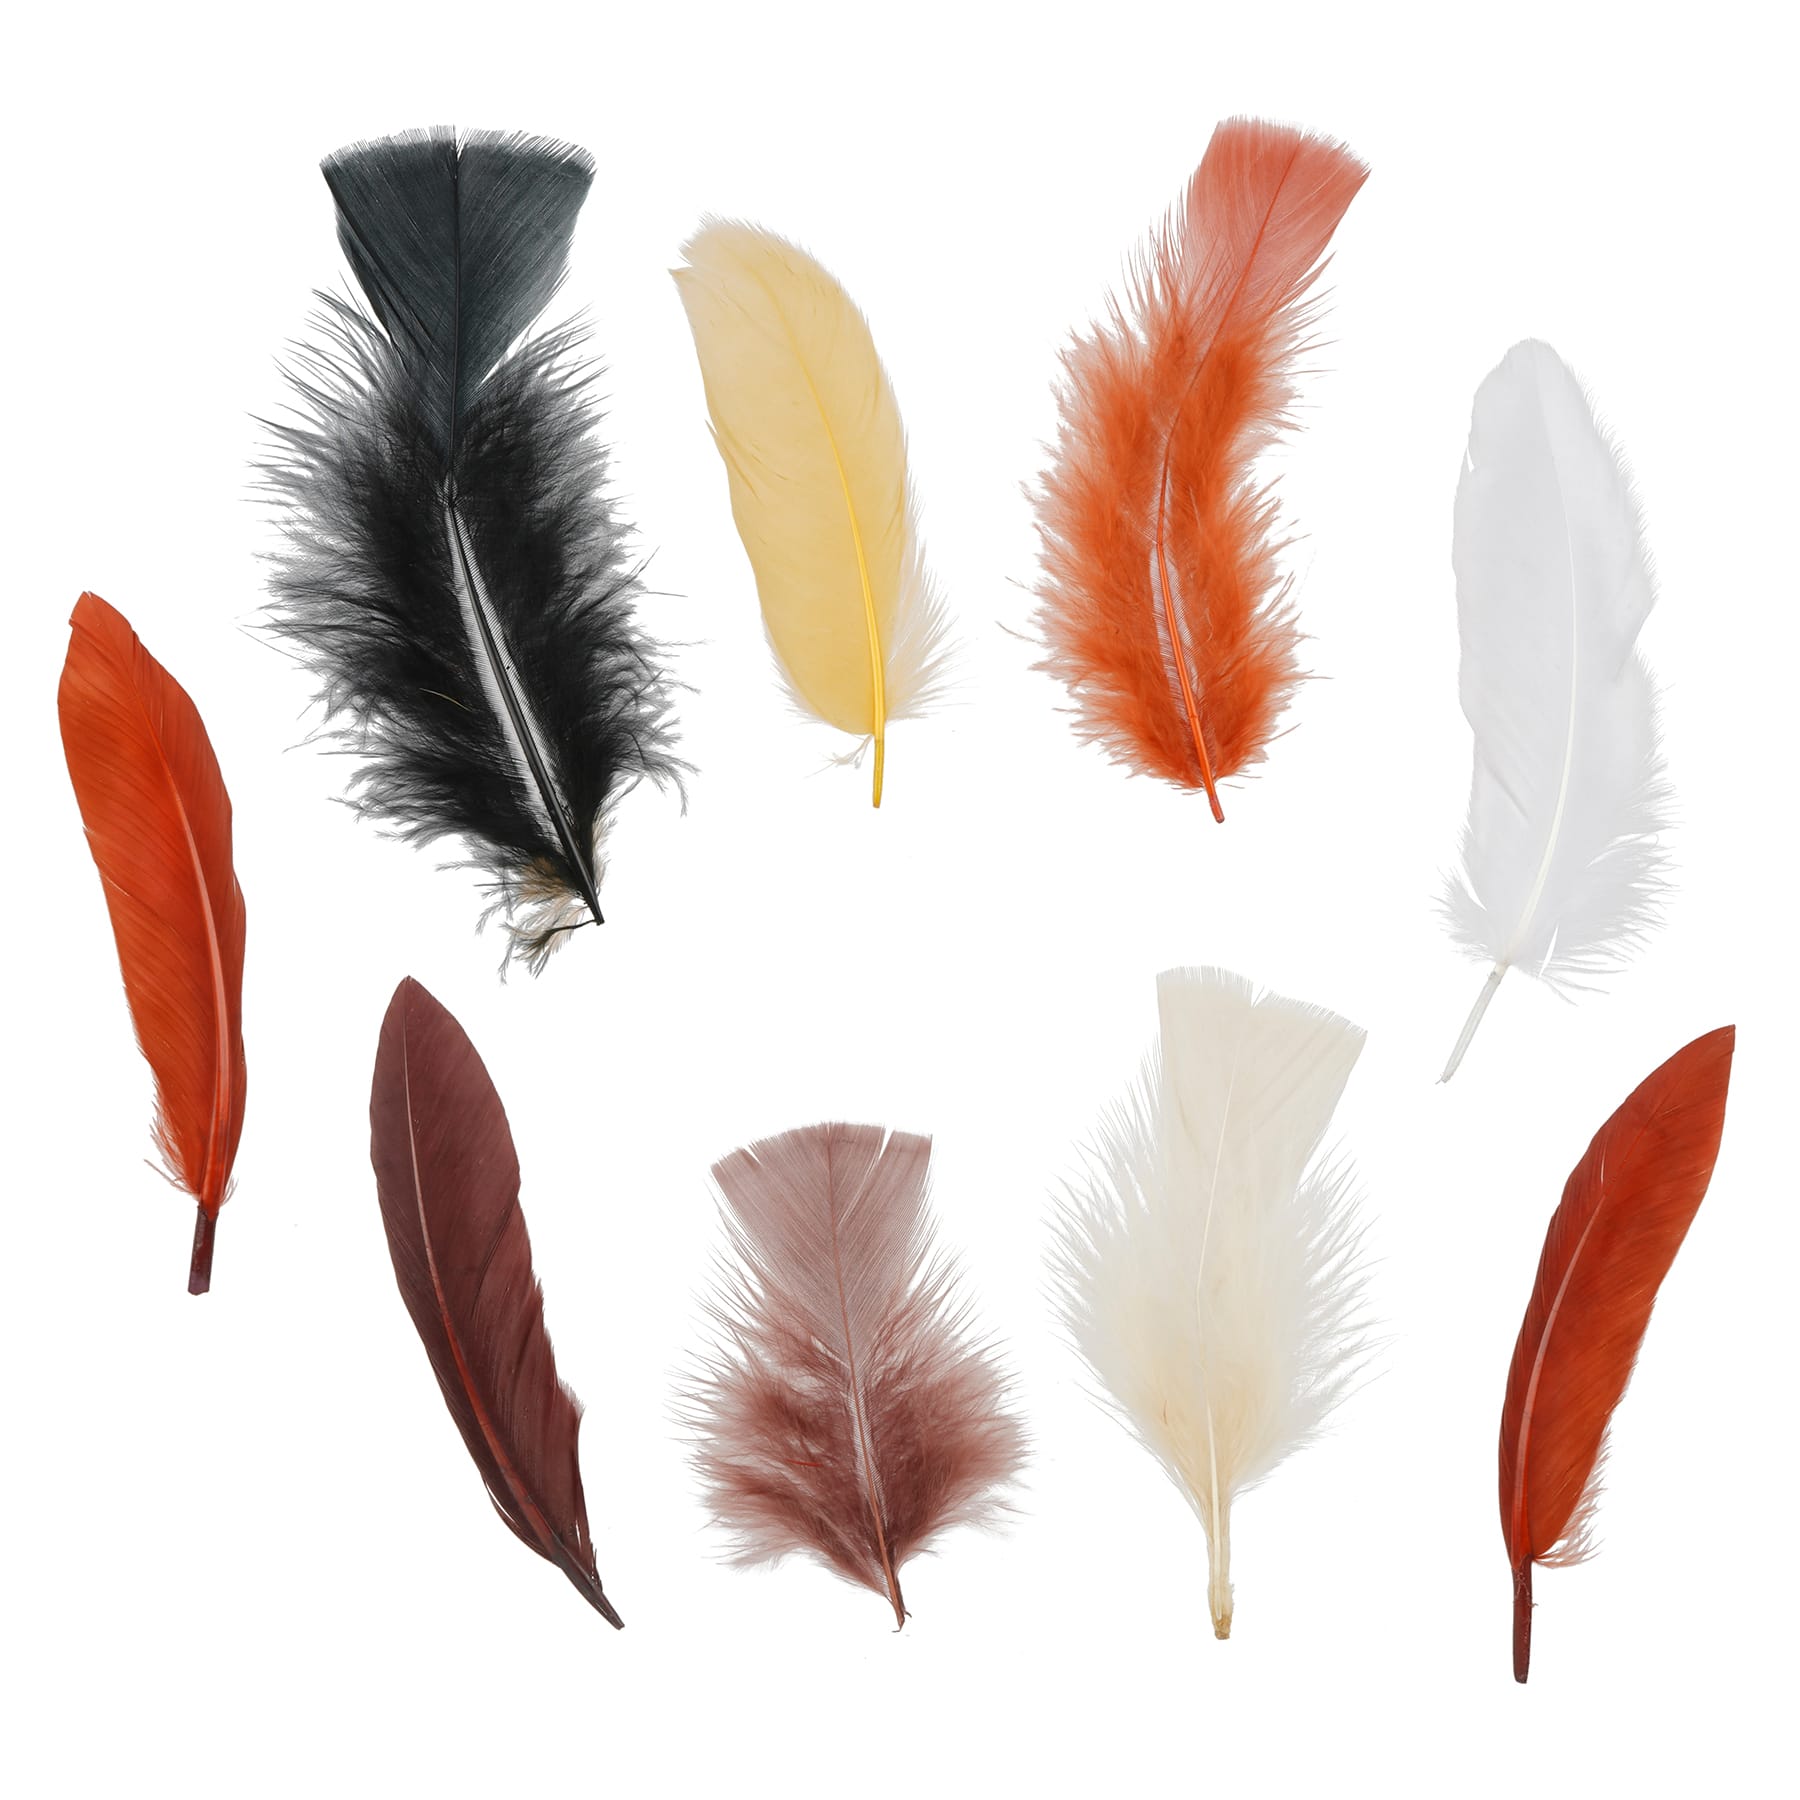 Orange Craft Feathers Turkey Plumage per one ounce package